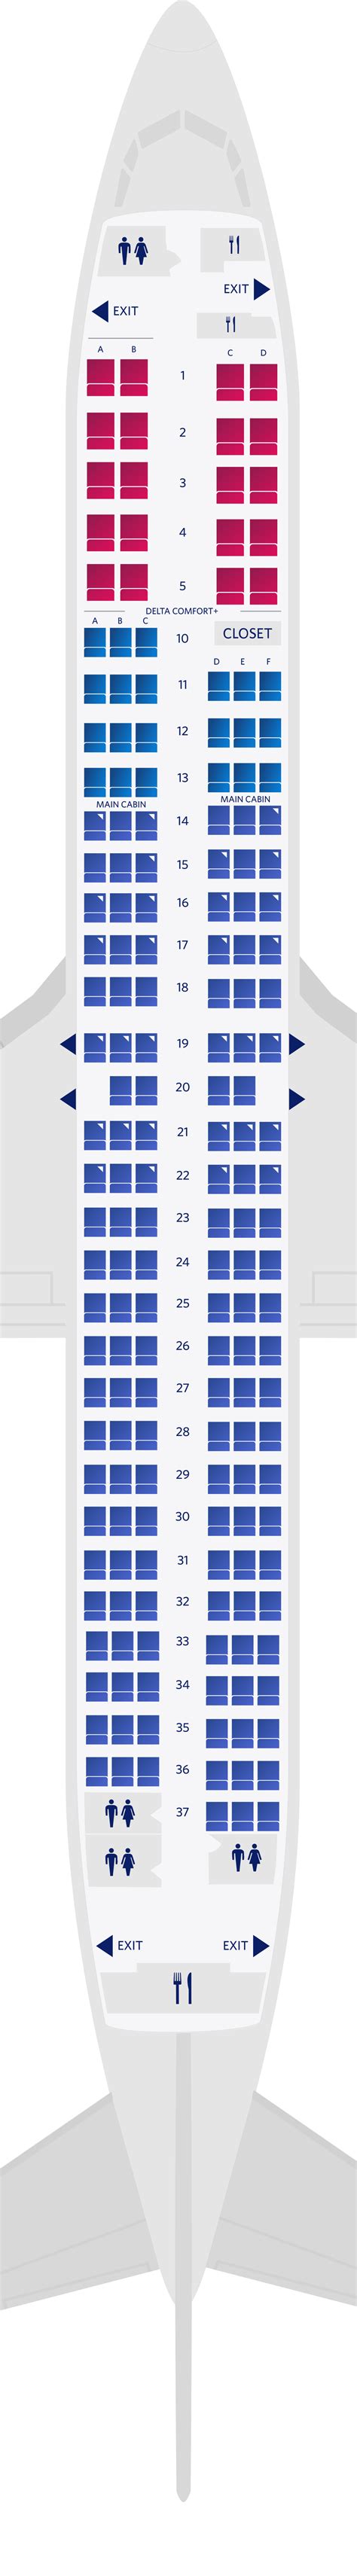 boeing 737-900 seating chart